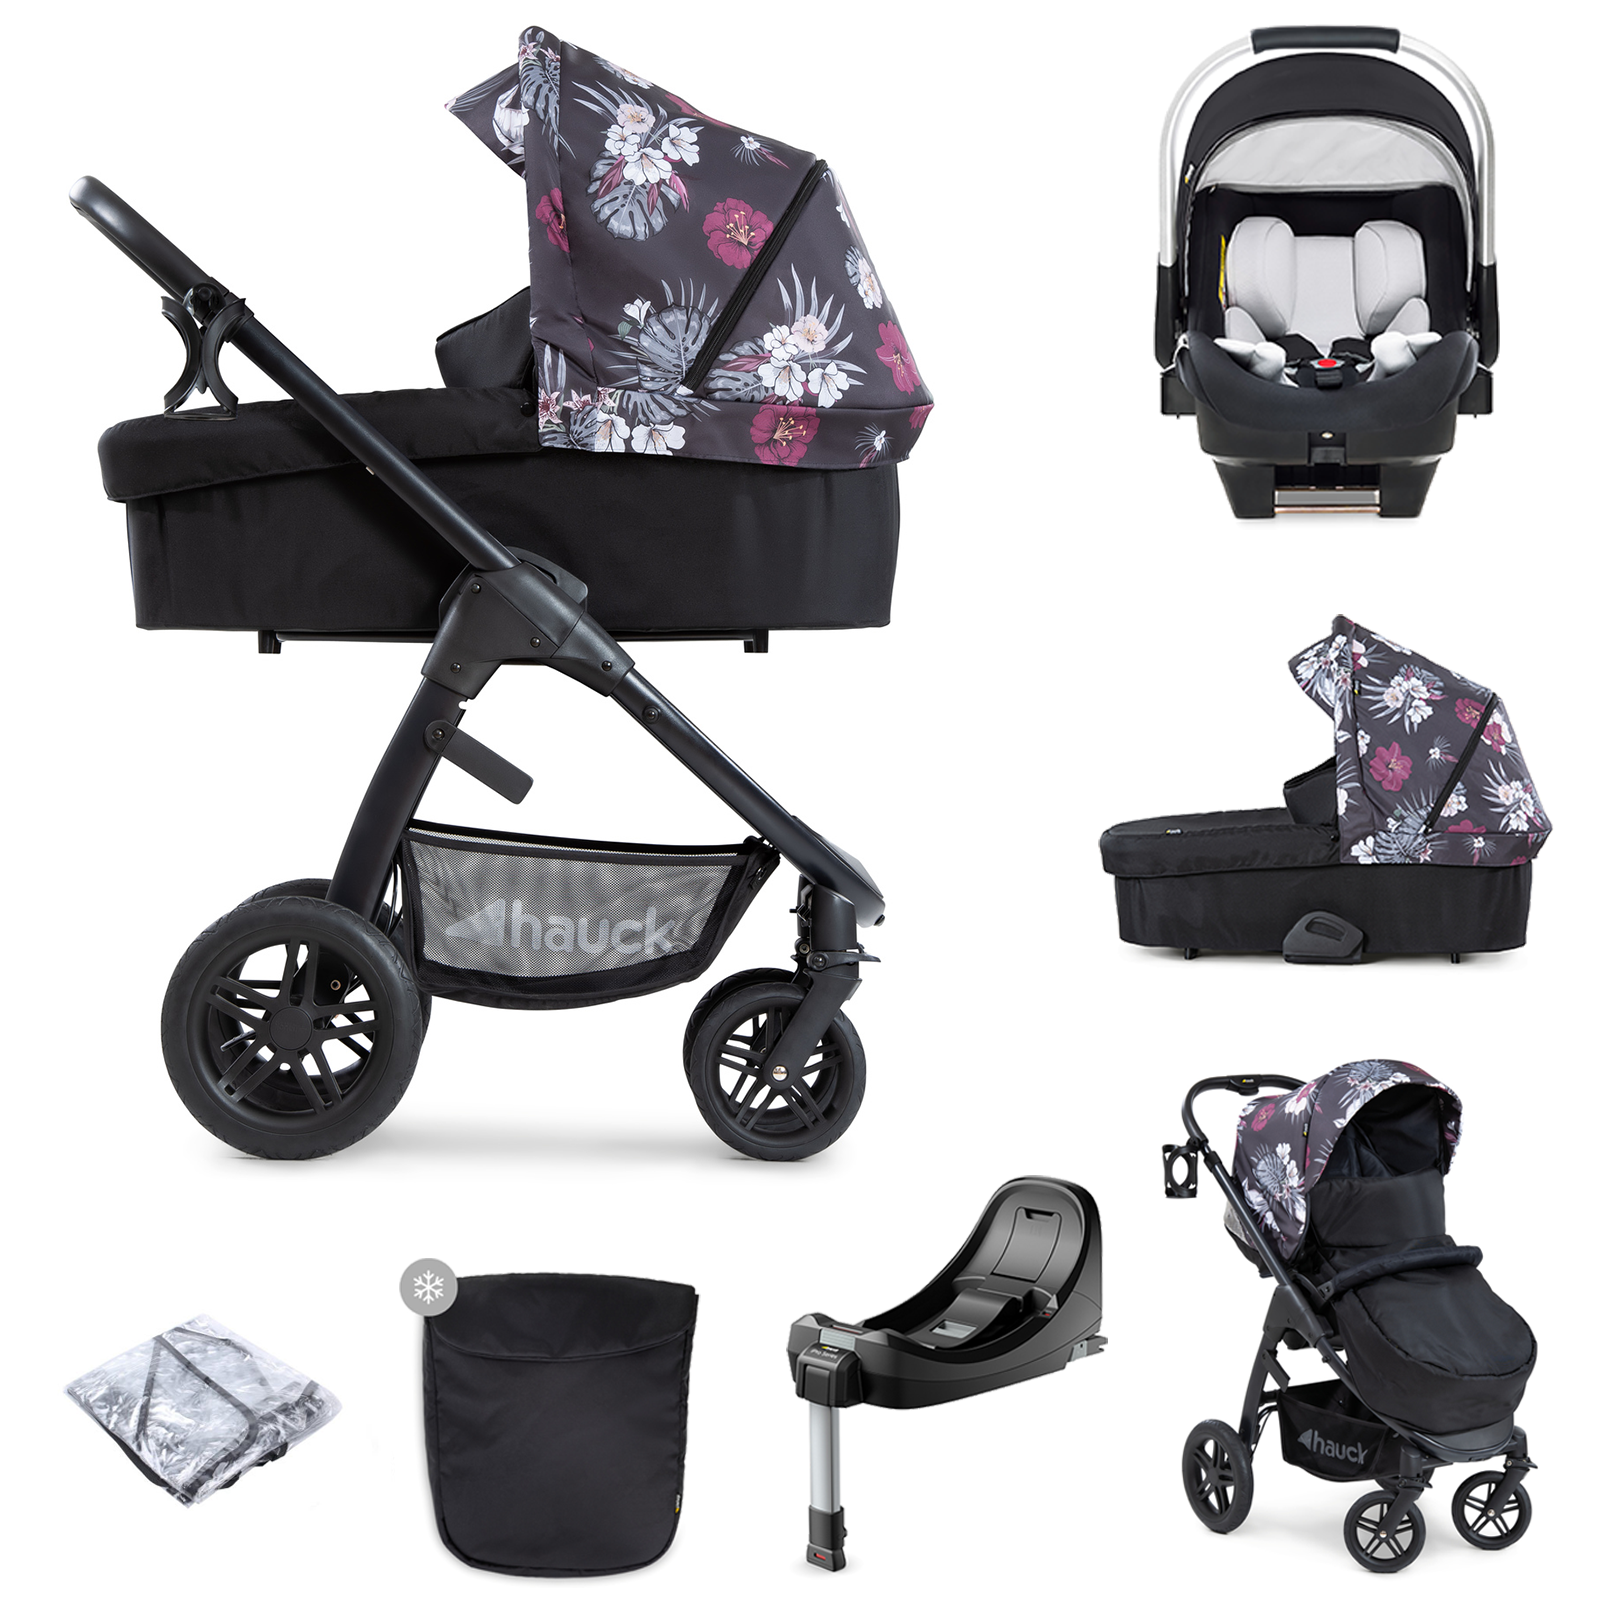 Hauck Saturn R (iPro) i-Size 3-in-1 Travel System With ISOFIX Base - Wild Bloom